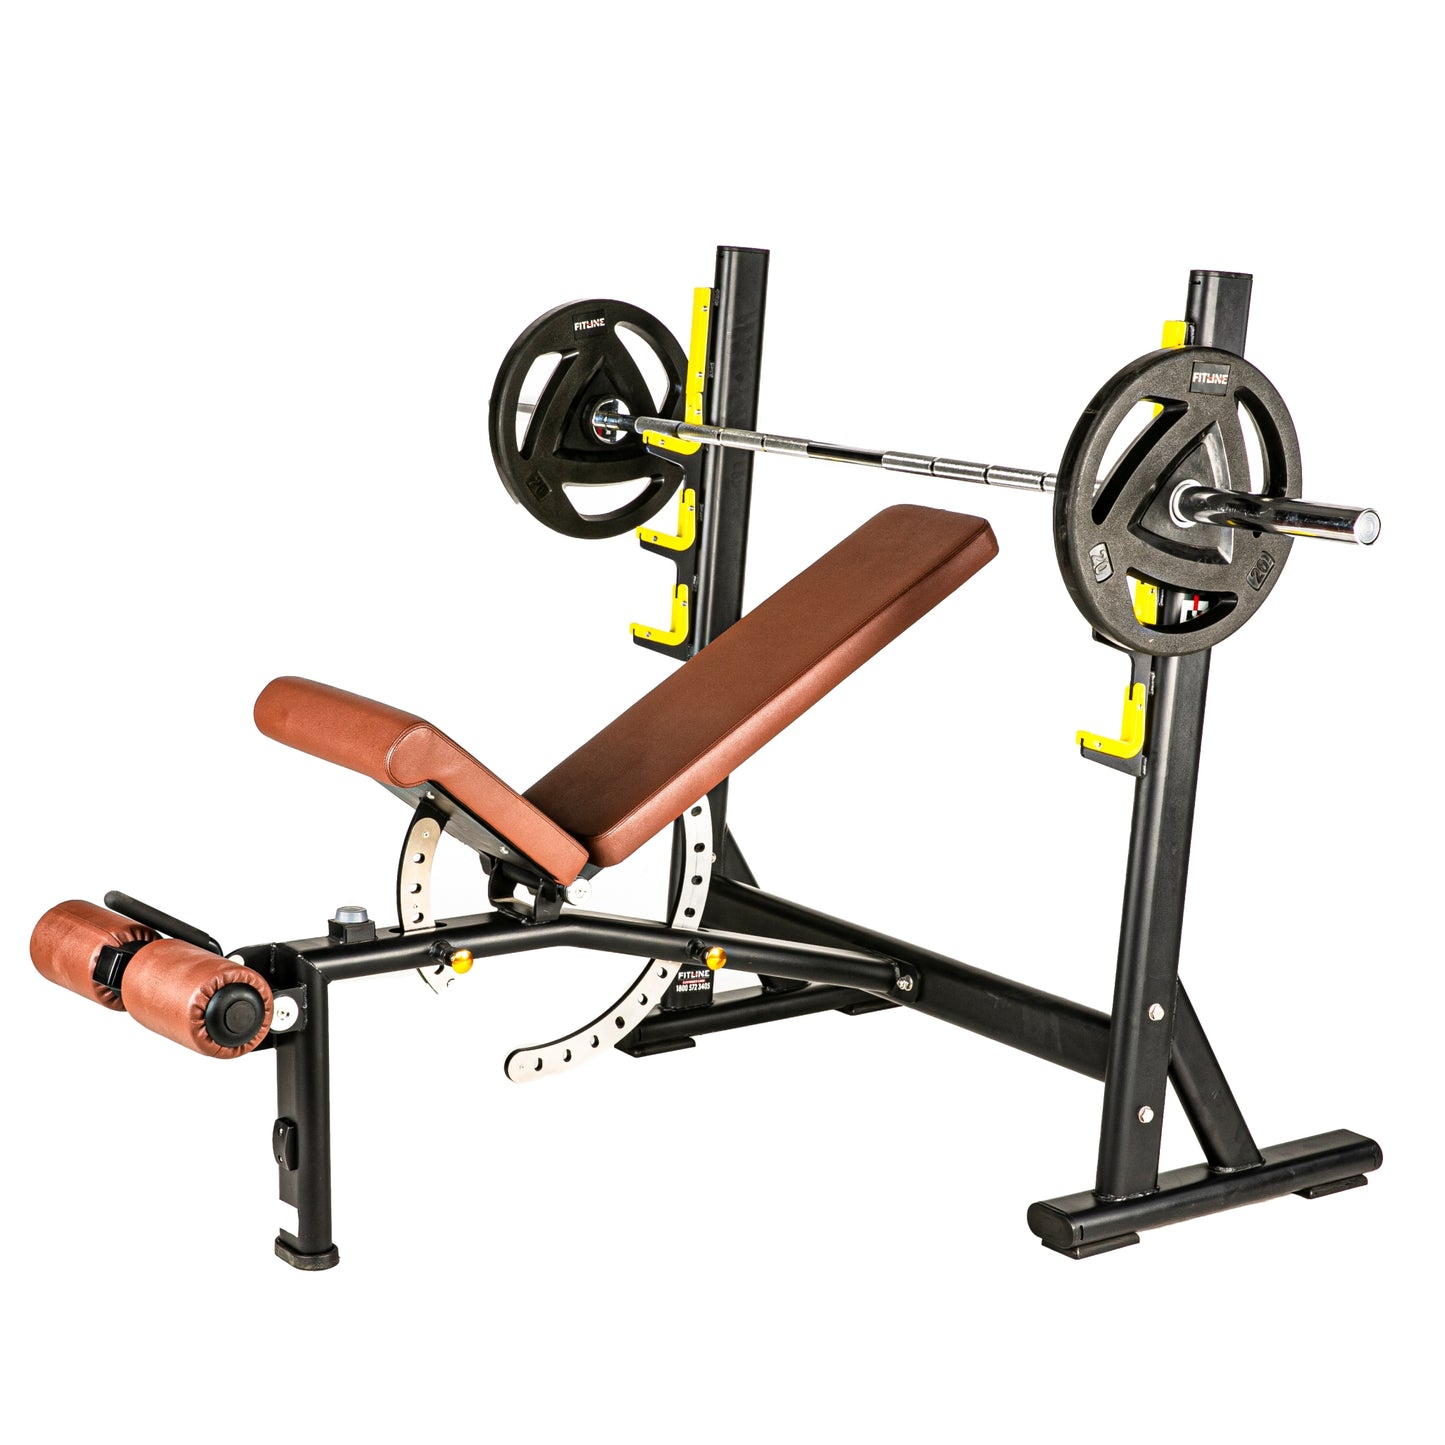 TS -202 - 3 IN 1 OLYMPIC BENCH - Exercise Equipment